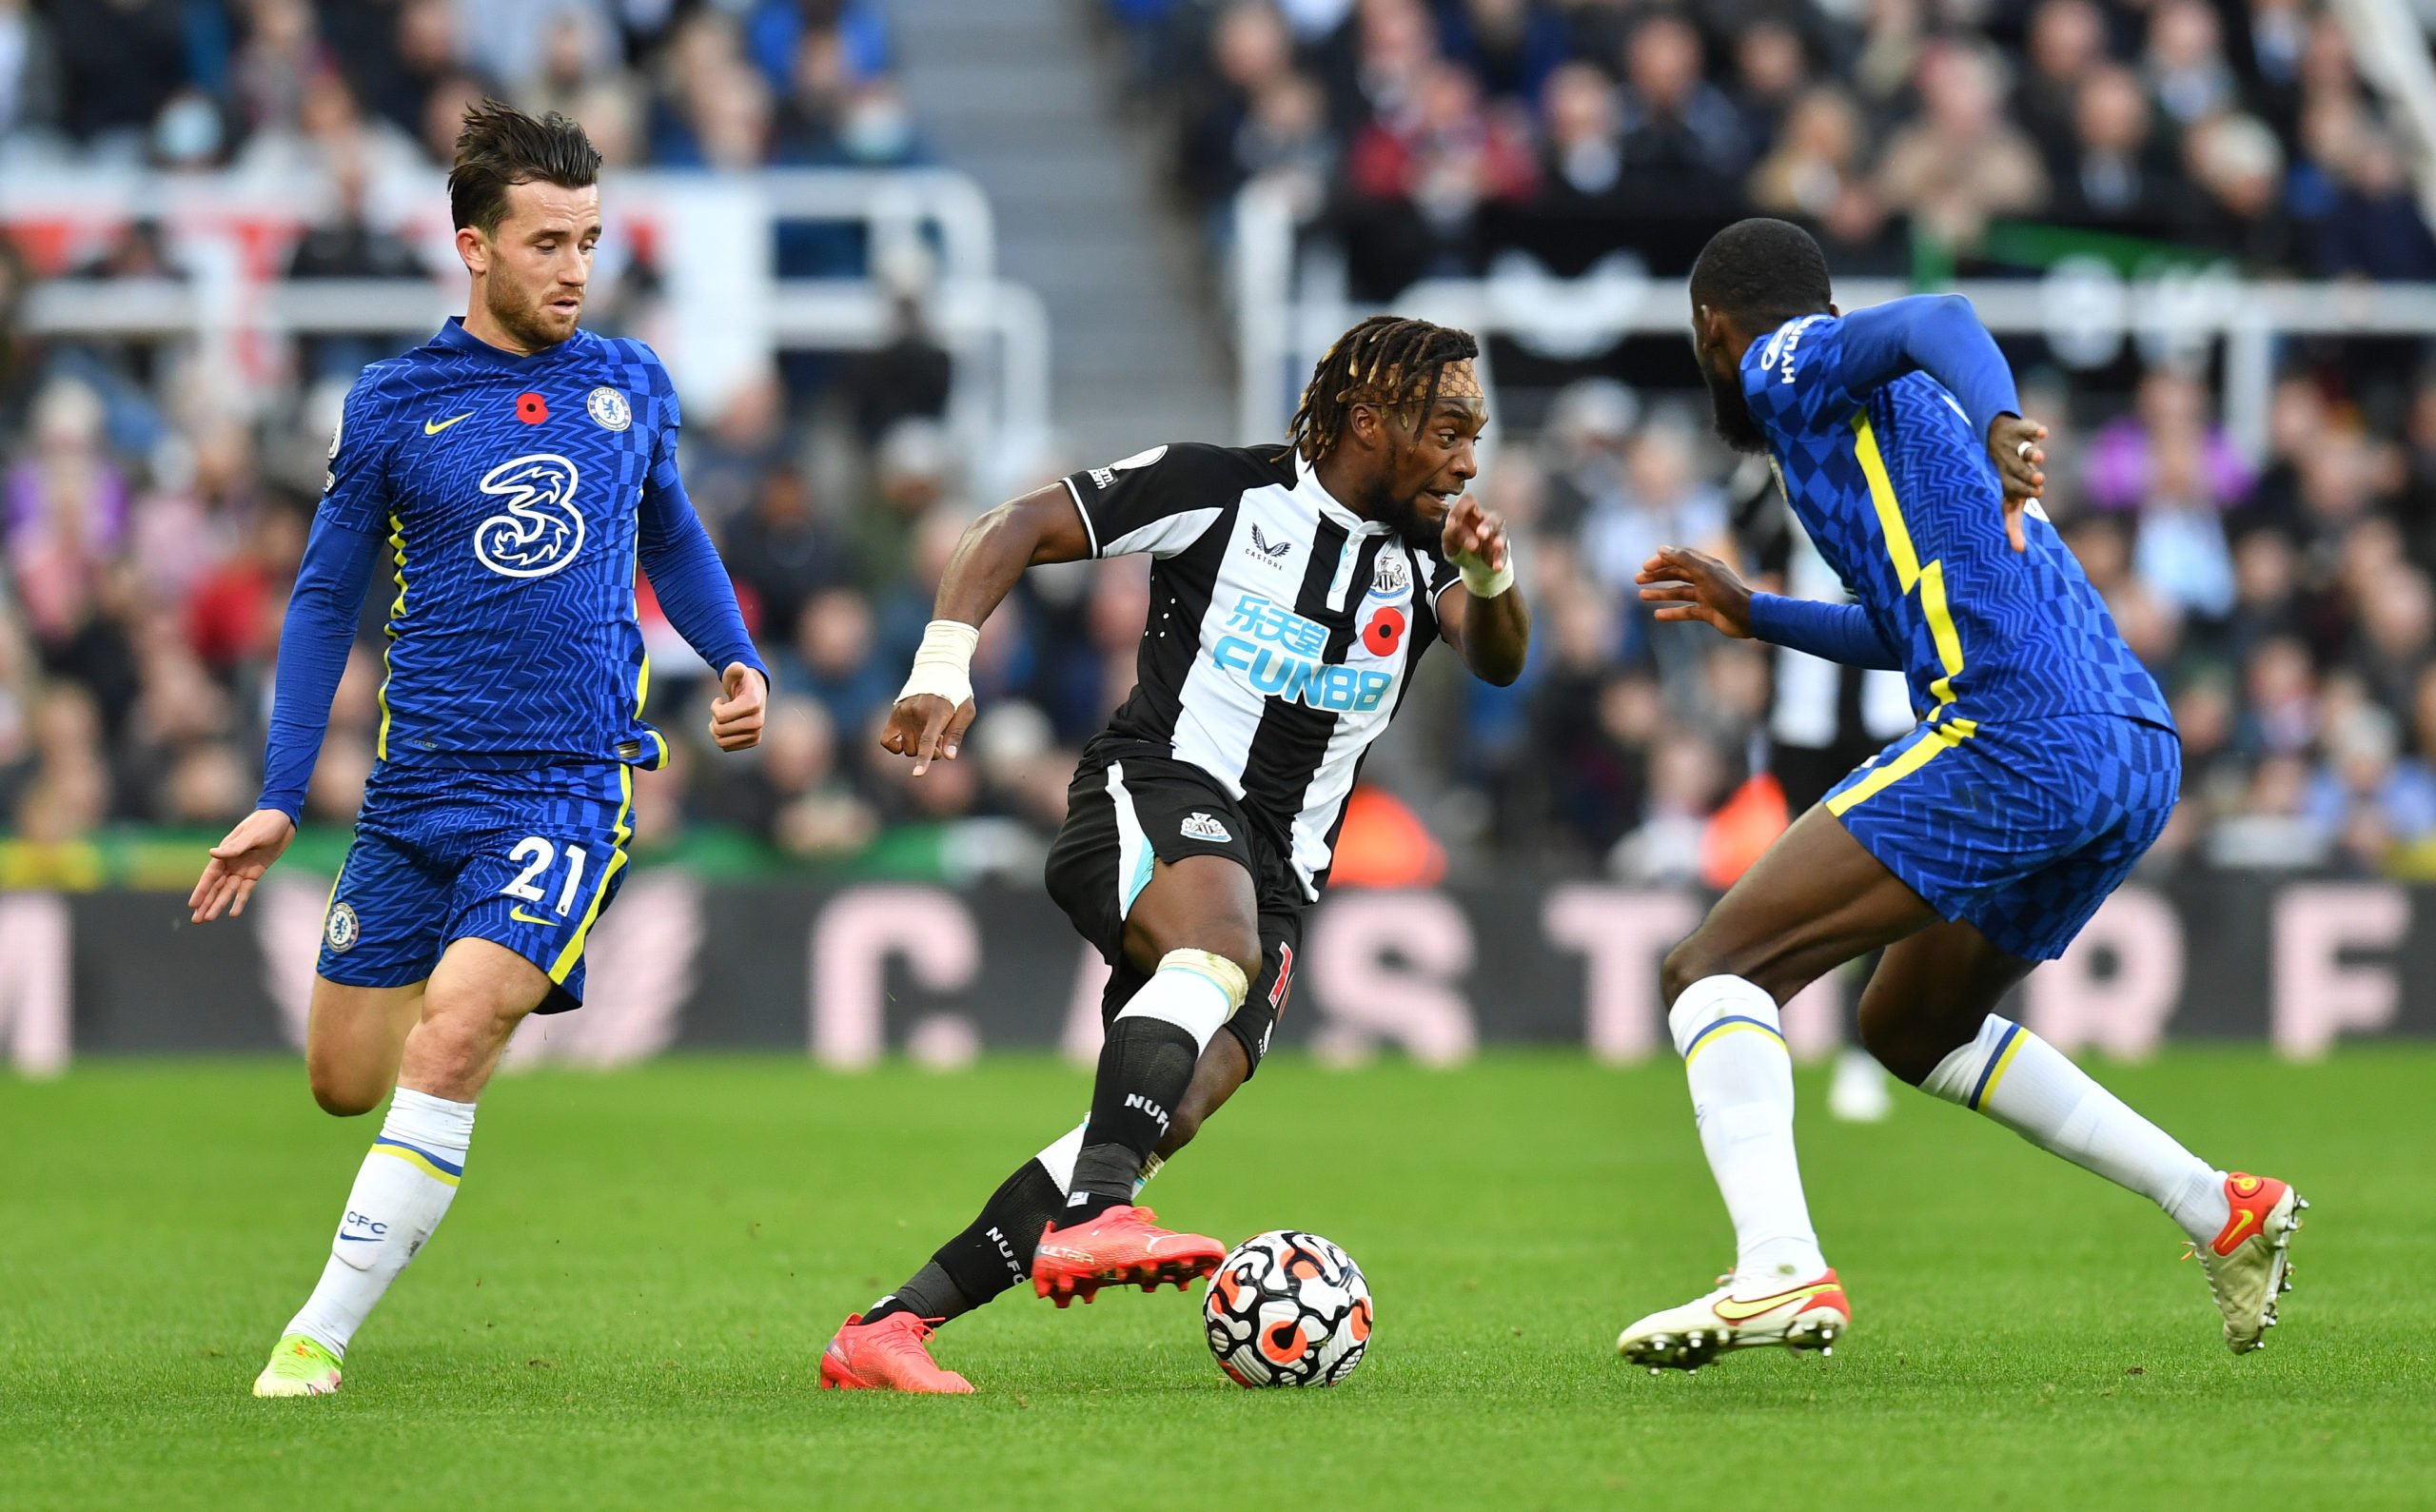 'You can see': Newcastle's Allan Saint-Maximin shares how he feels after playing against Chelsea